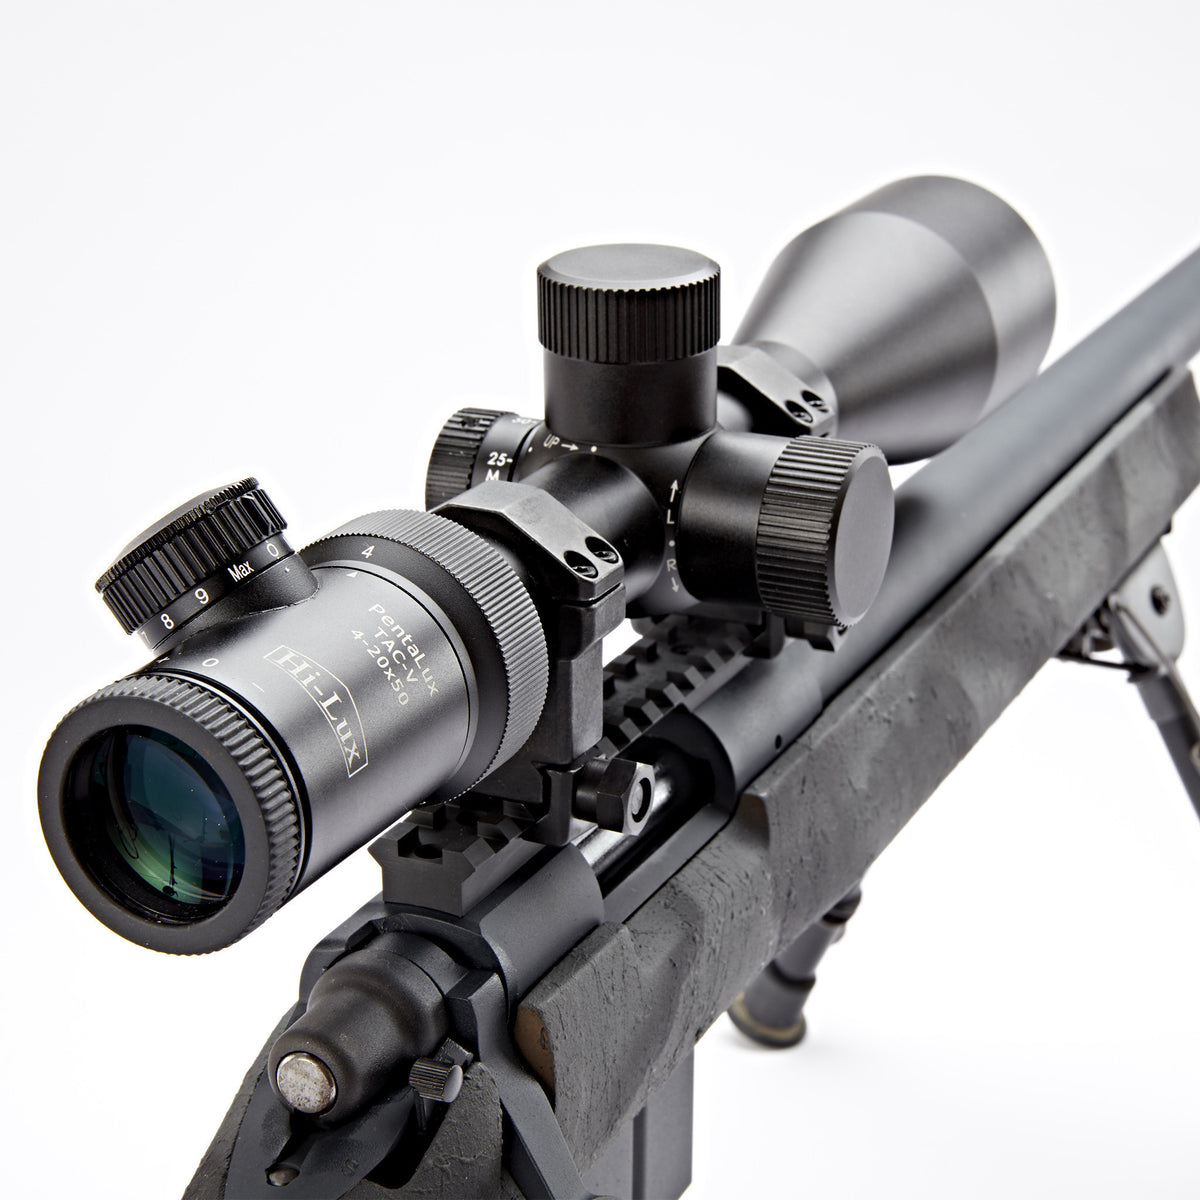 TAC-V420 eyepiece view mounted on TYR Bolt rifle